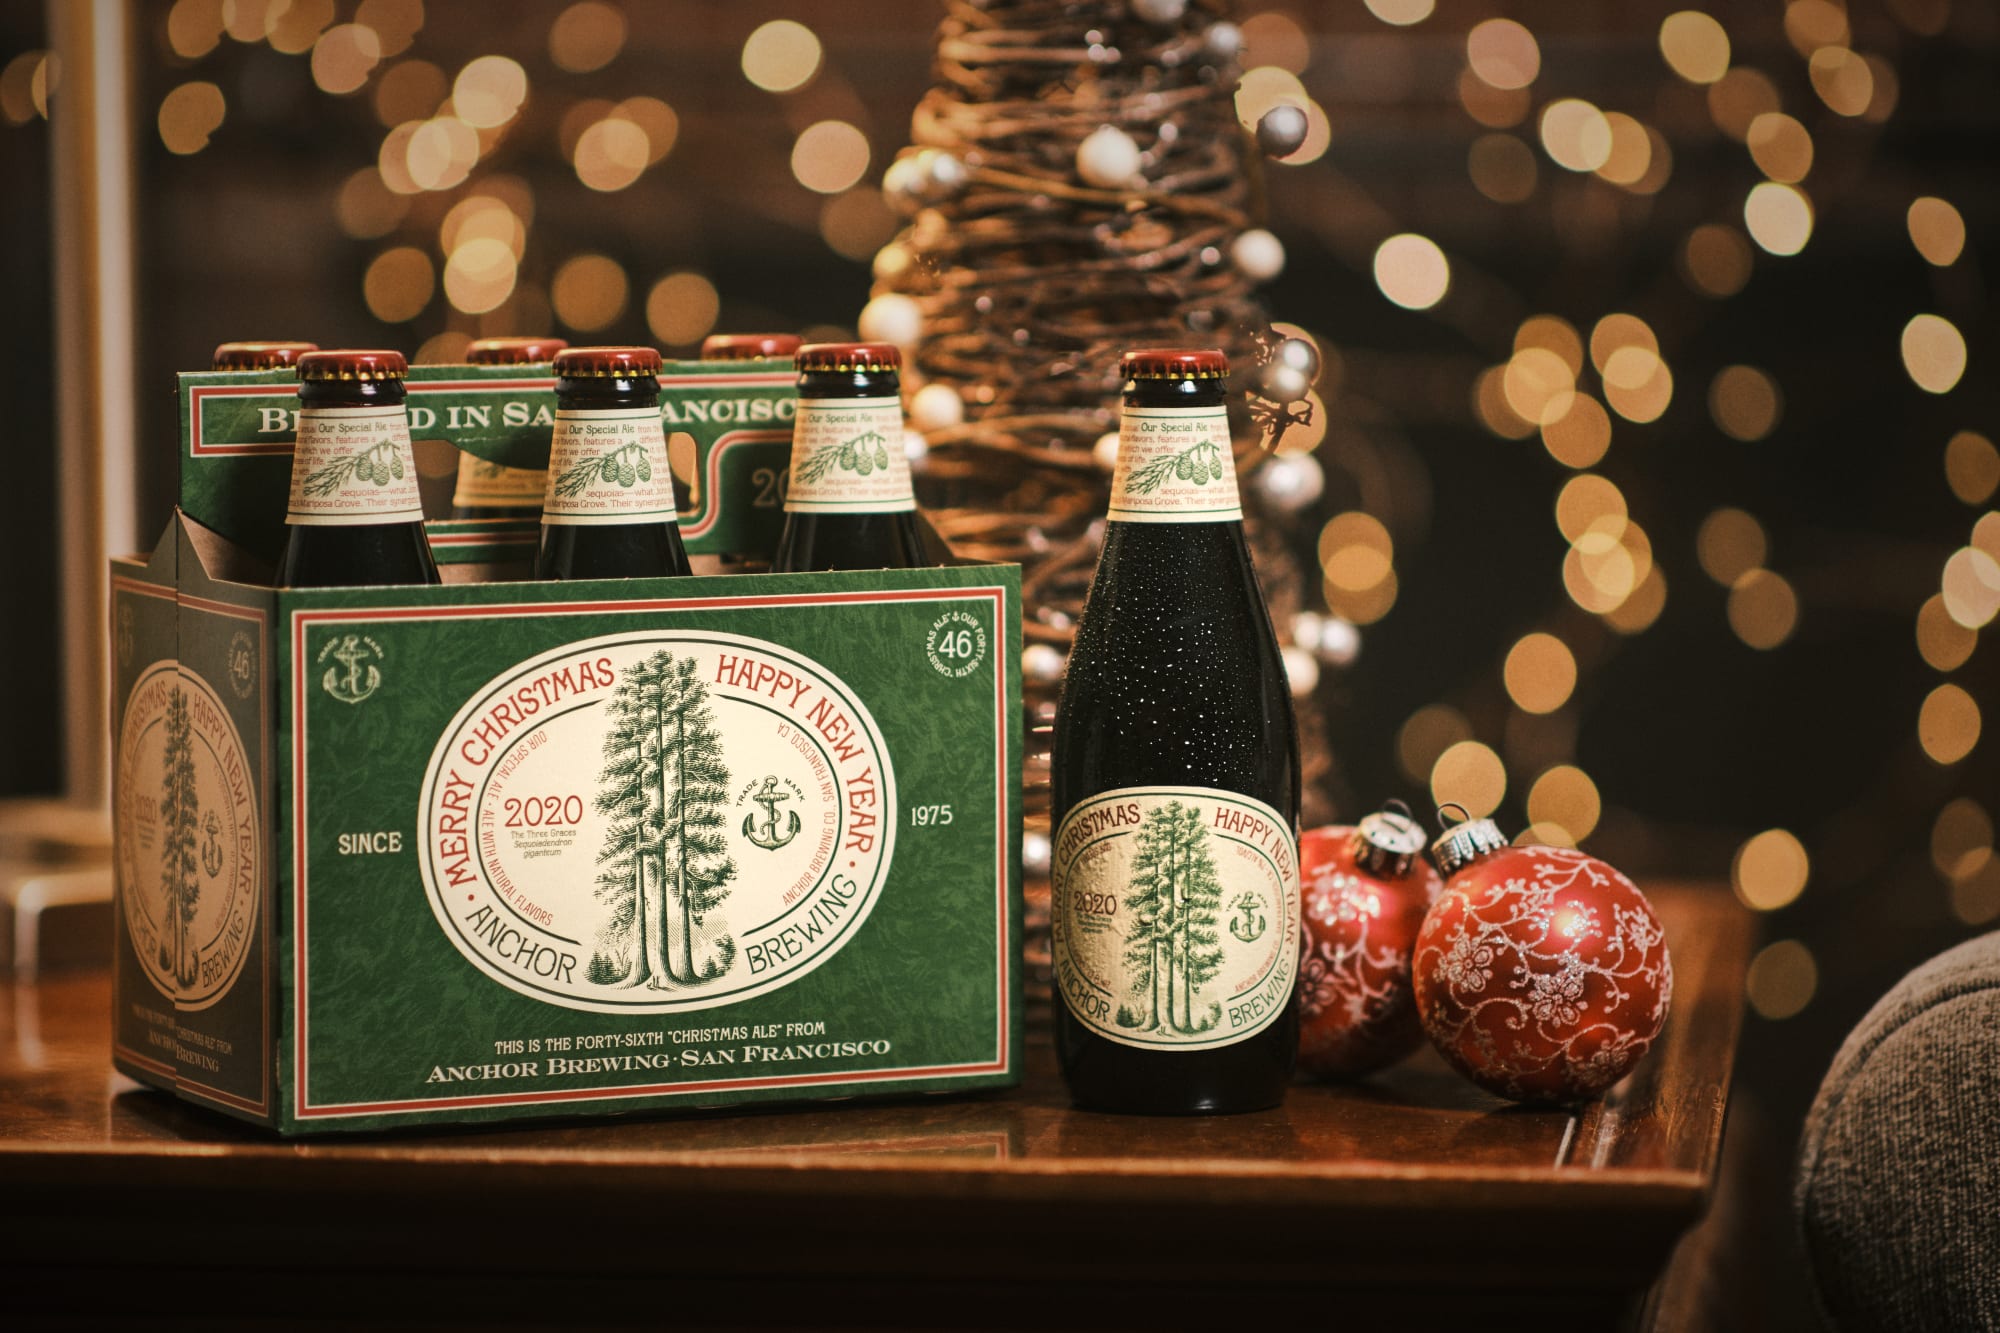 Anchor Christmas Ale is the holiday beer tradition that must be enjoyed